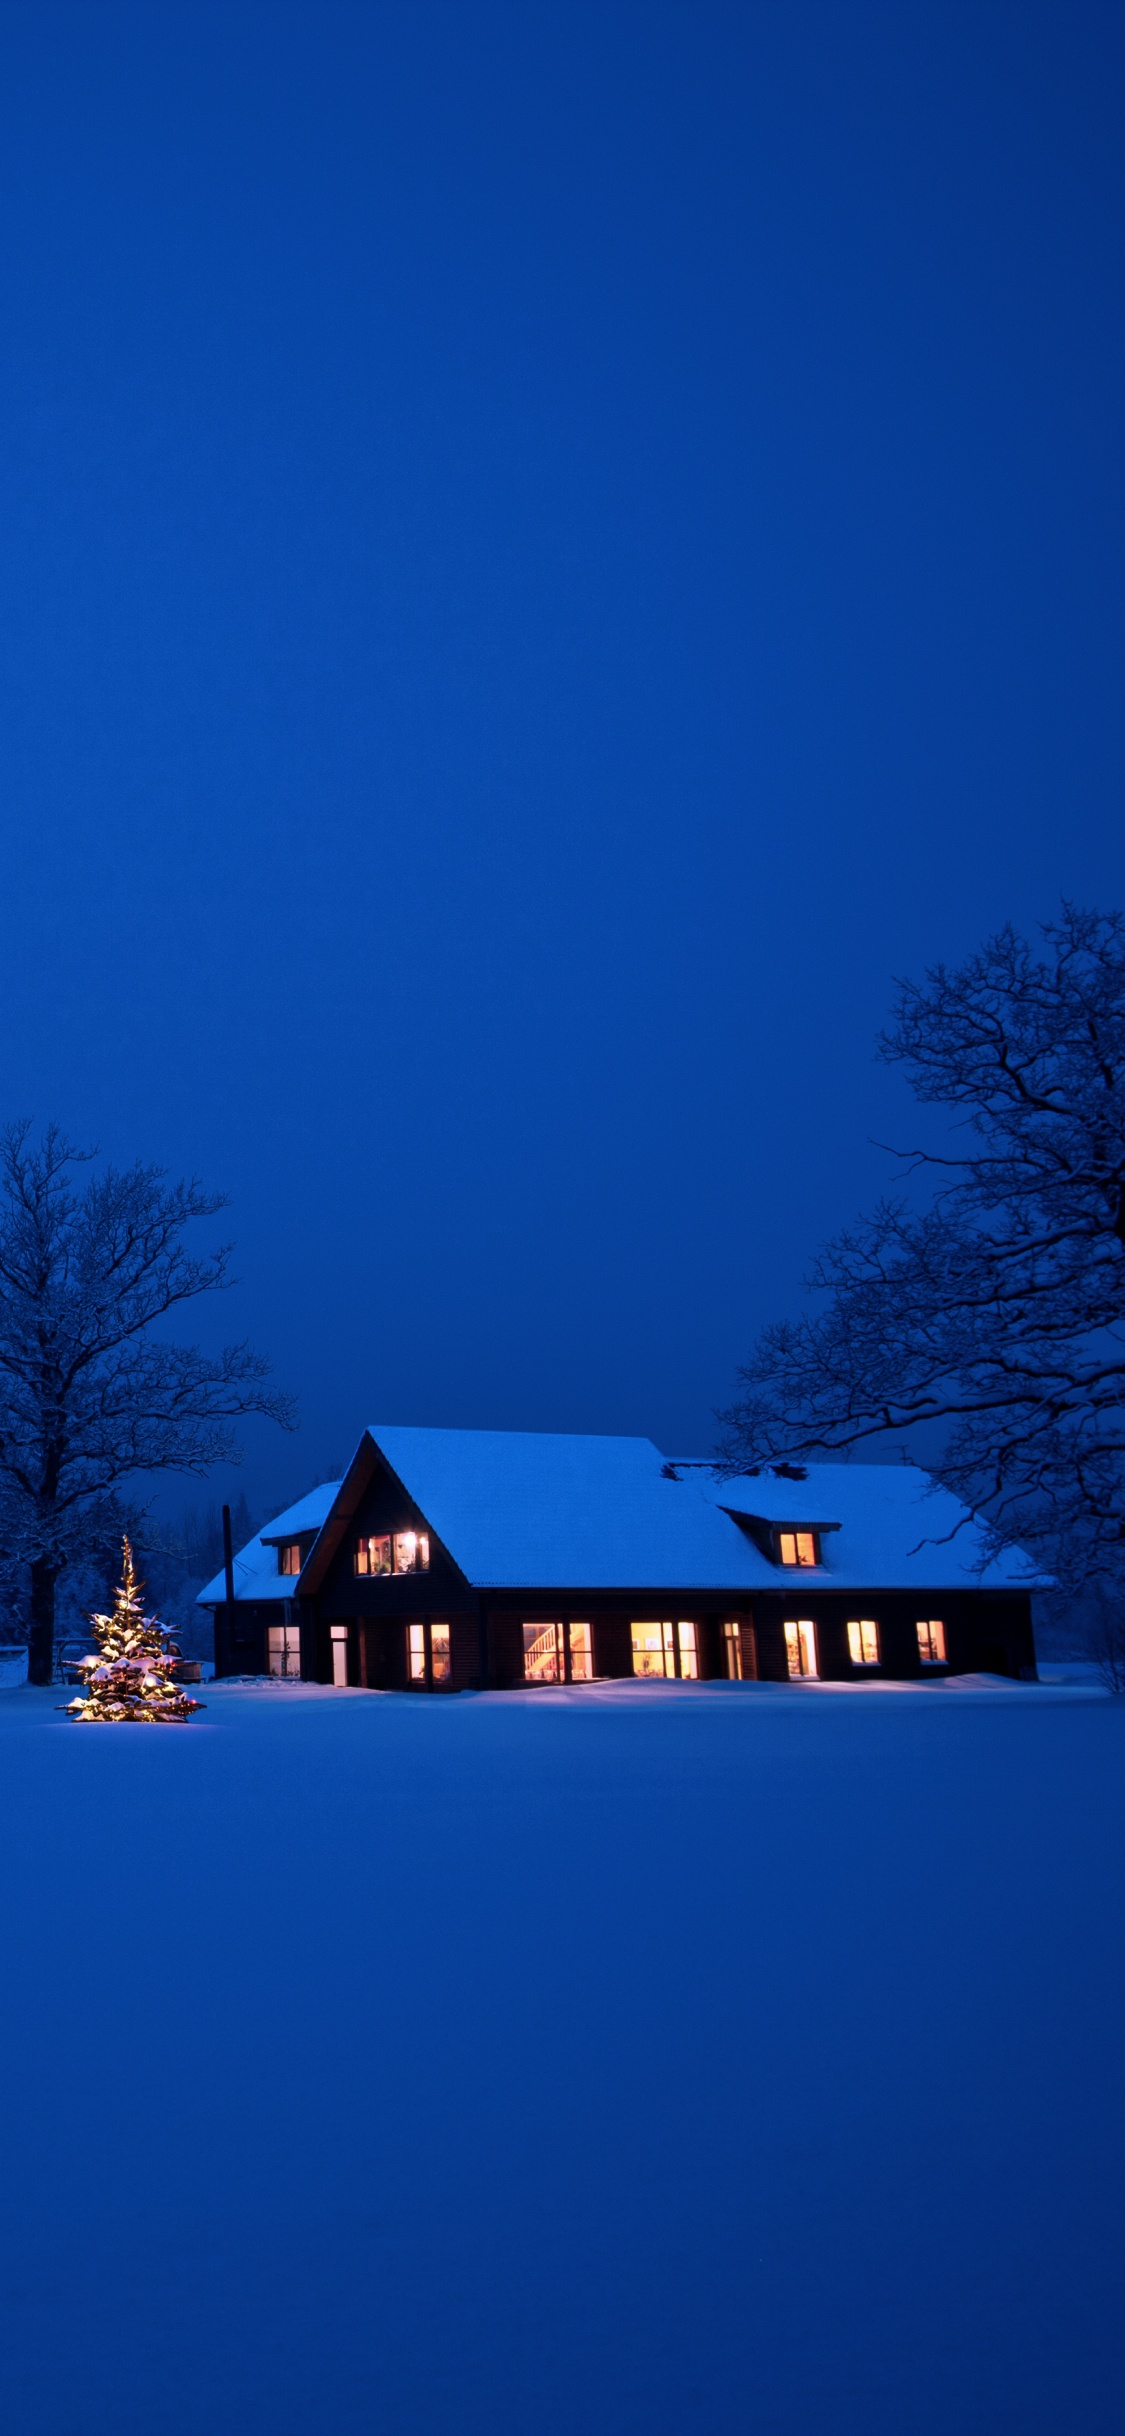 Brown Wooden House on Snow Covered Ground During Night Time. Wallpaper in 1125x2436 Resolution